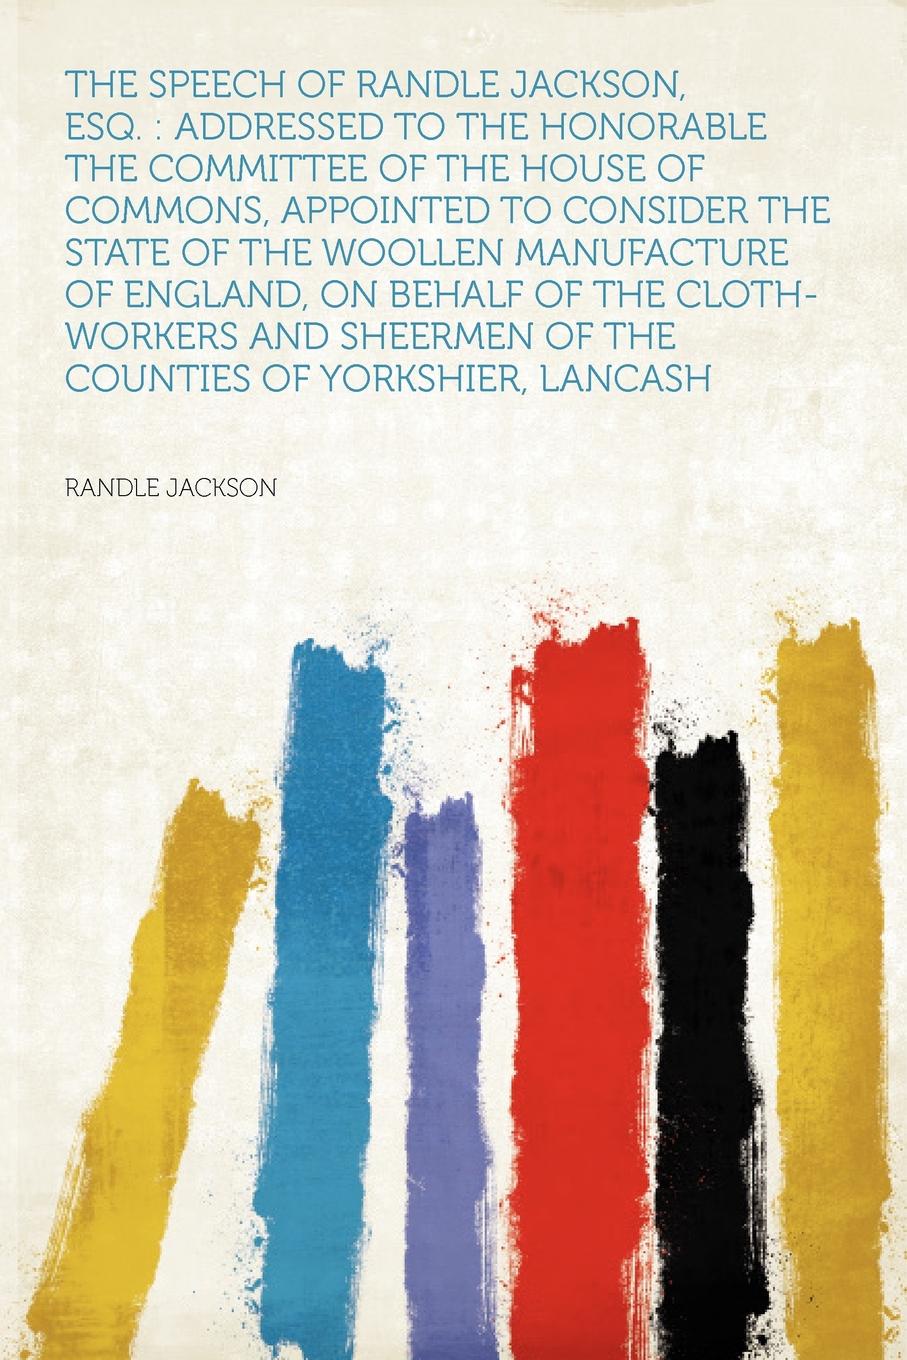 The Speech of Randle Jackson, Esq. Addressed to the Honorable the Committee of the House of Commons, Appointed to Consider the State of the Woollen Manufacture of England, on Behalf of the Cloth-workers and Sheermen of the Counties of Yorkshier, L...